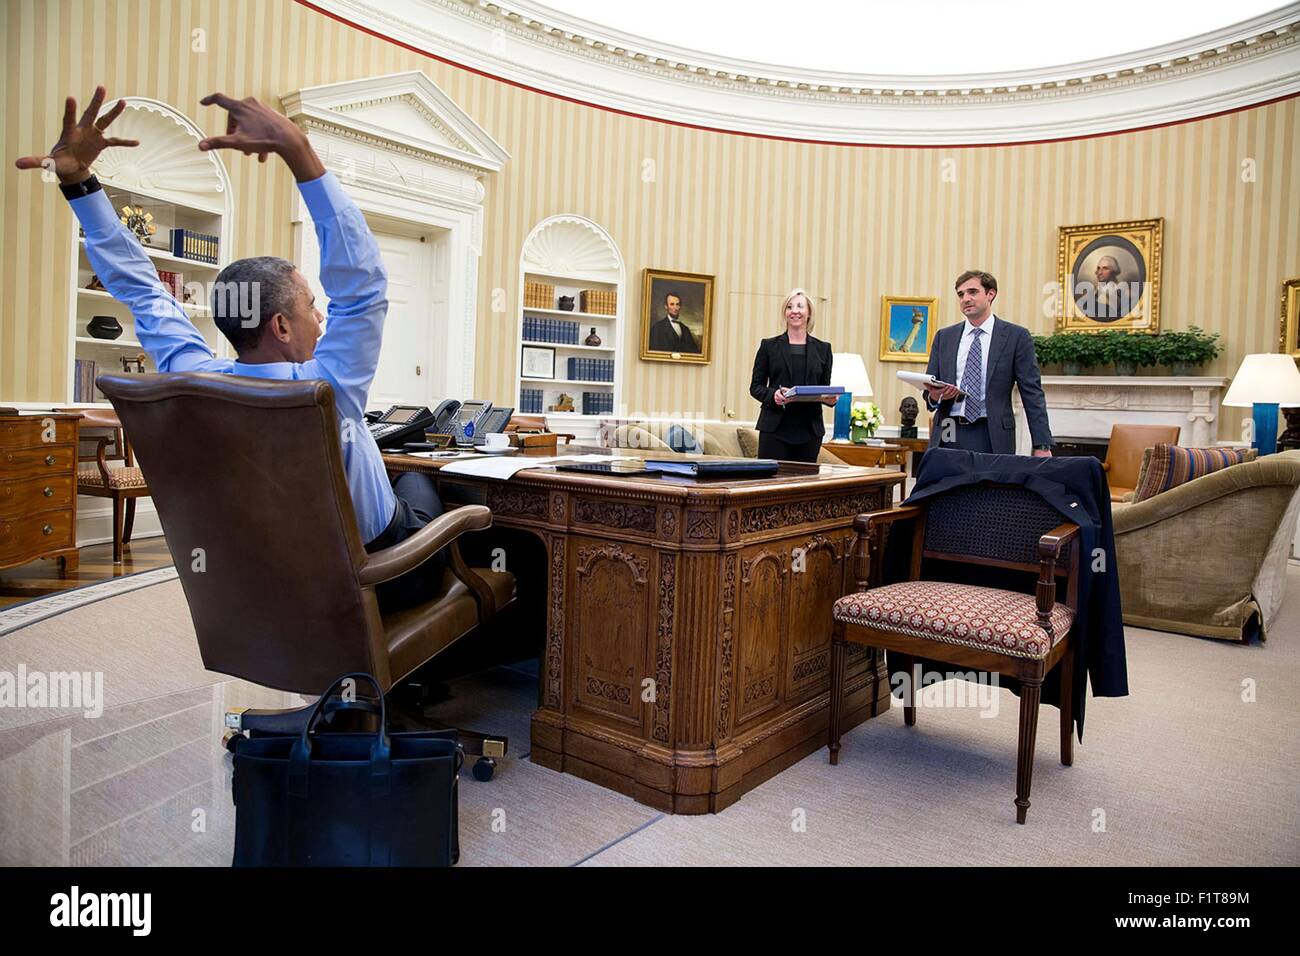 U.S. President Barack Obama gestures as he meets with Anita  Breckenridge, Deputy Chief of Staff for Operations and Chase Cushman, Director of Scheduling and Advance in the Oval Office of the White House April 17, 2015 in Washington, DC. Stock Photo